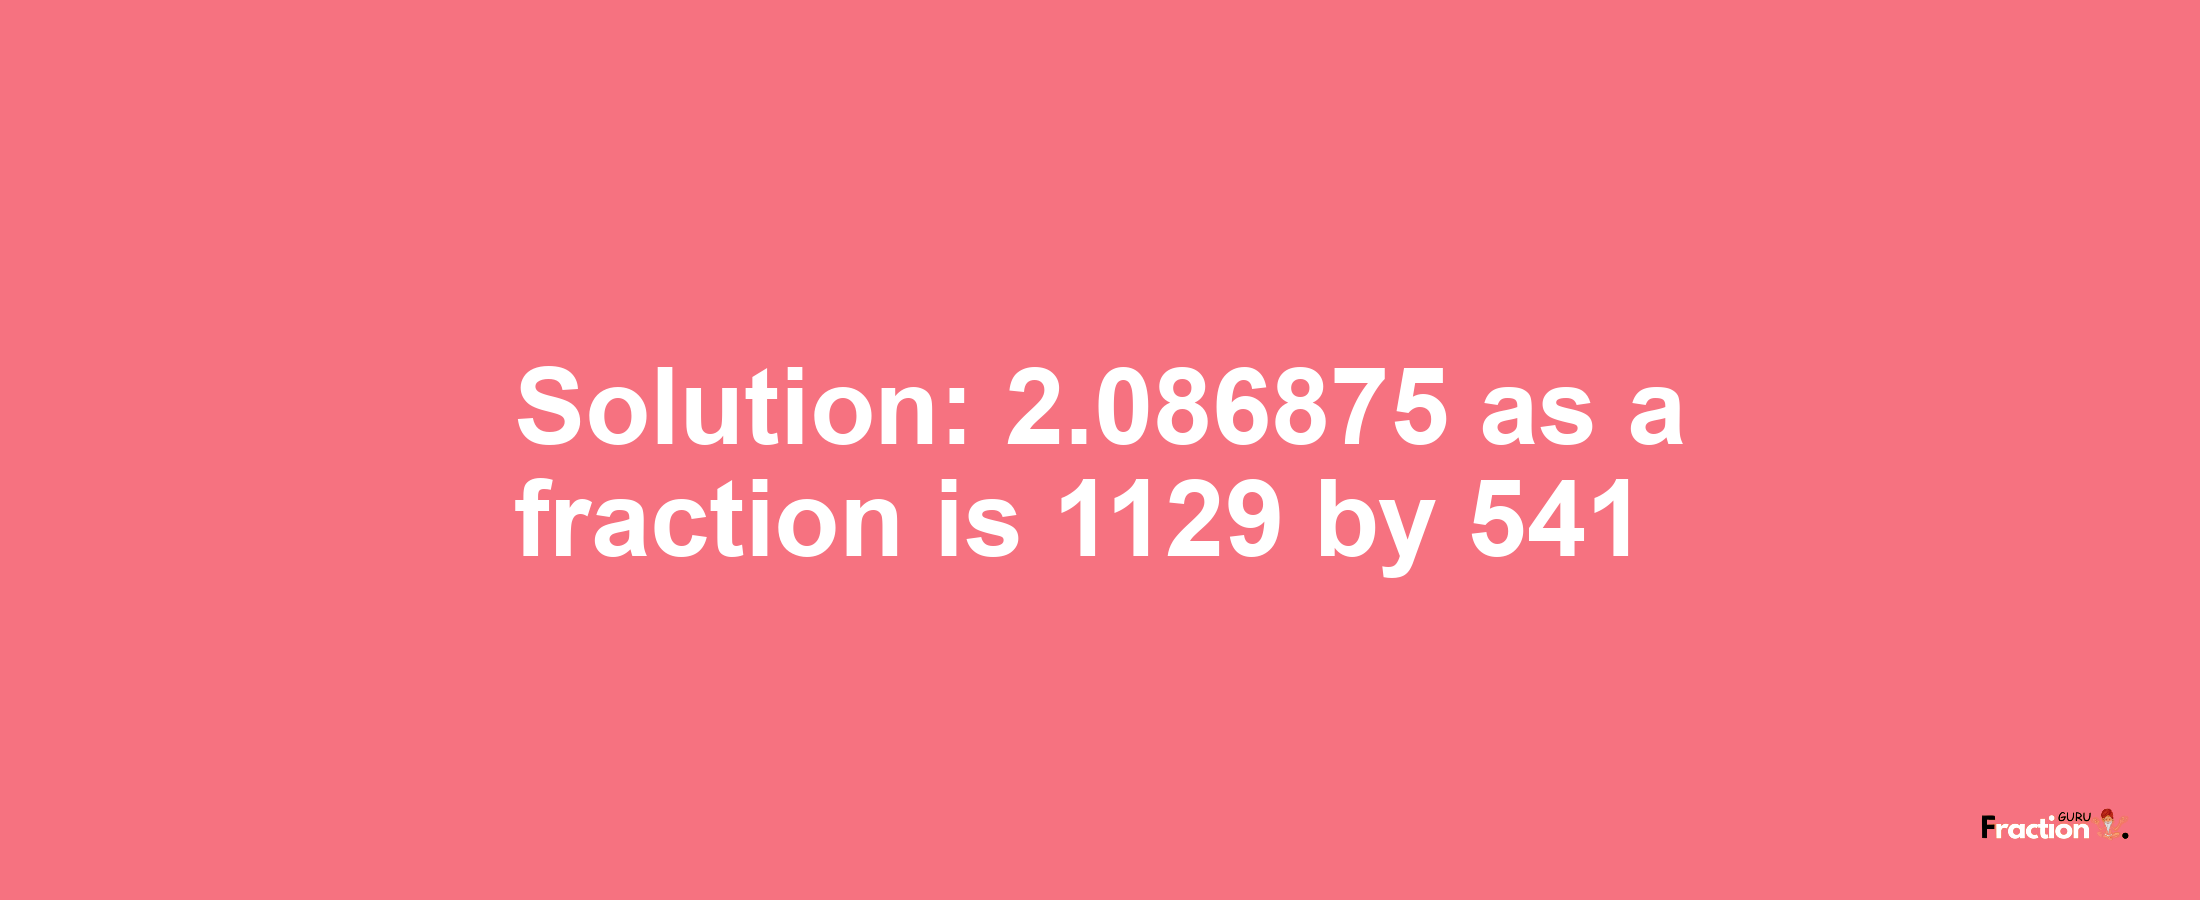 Solution:2.086875 as a fraction is 1129/541